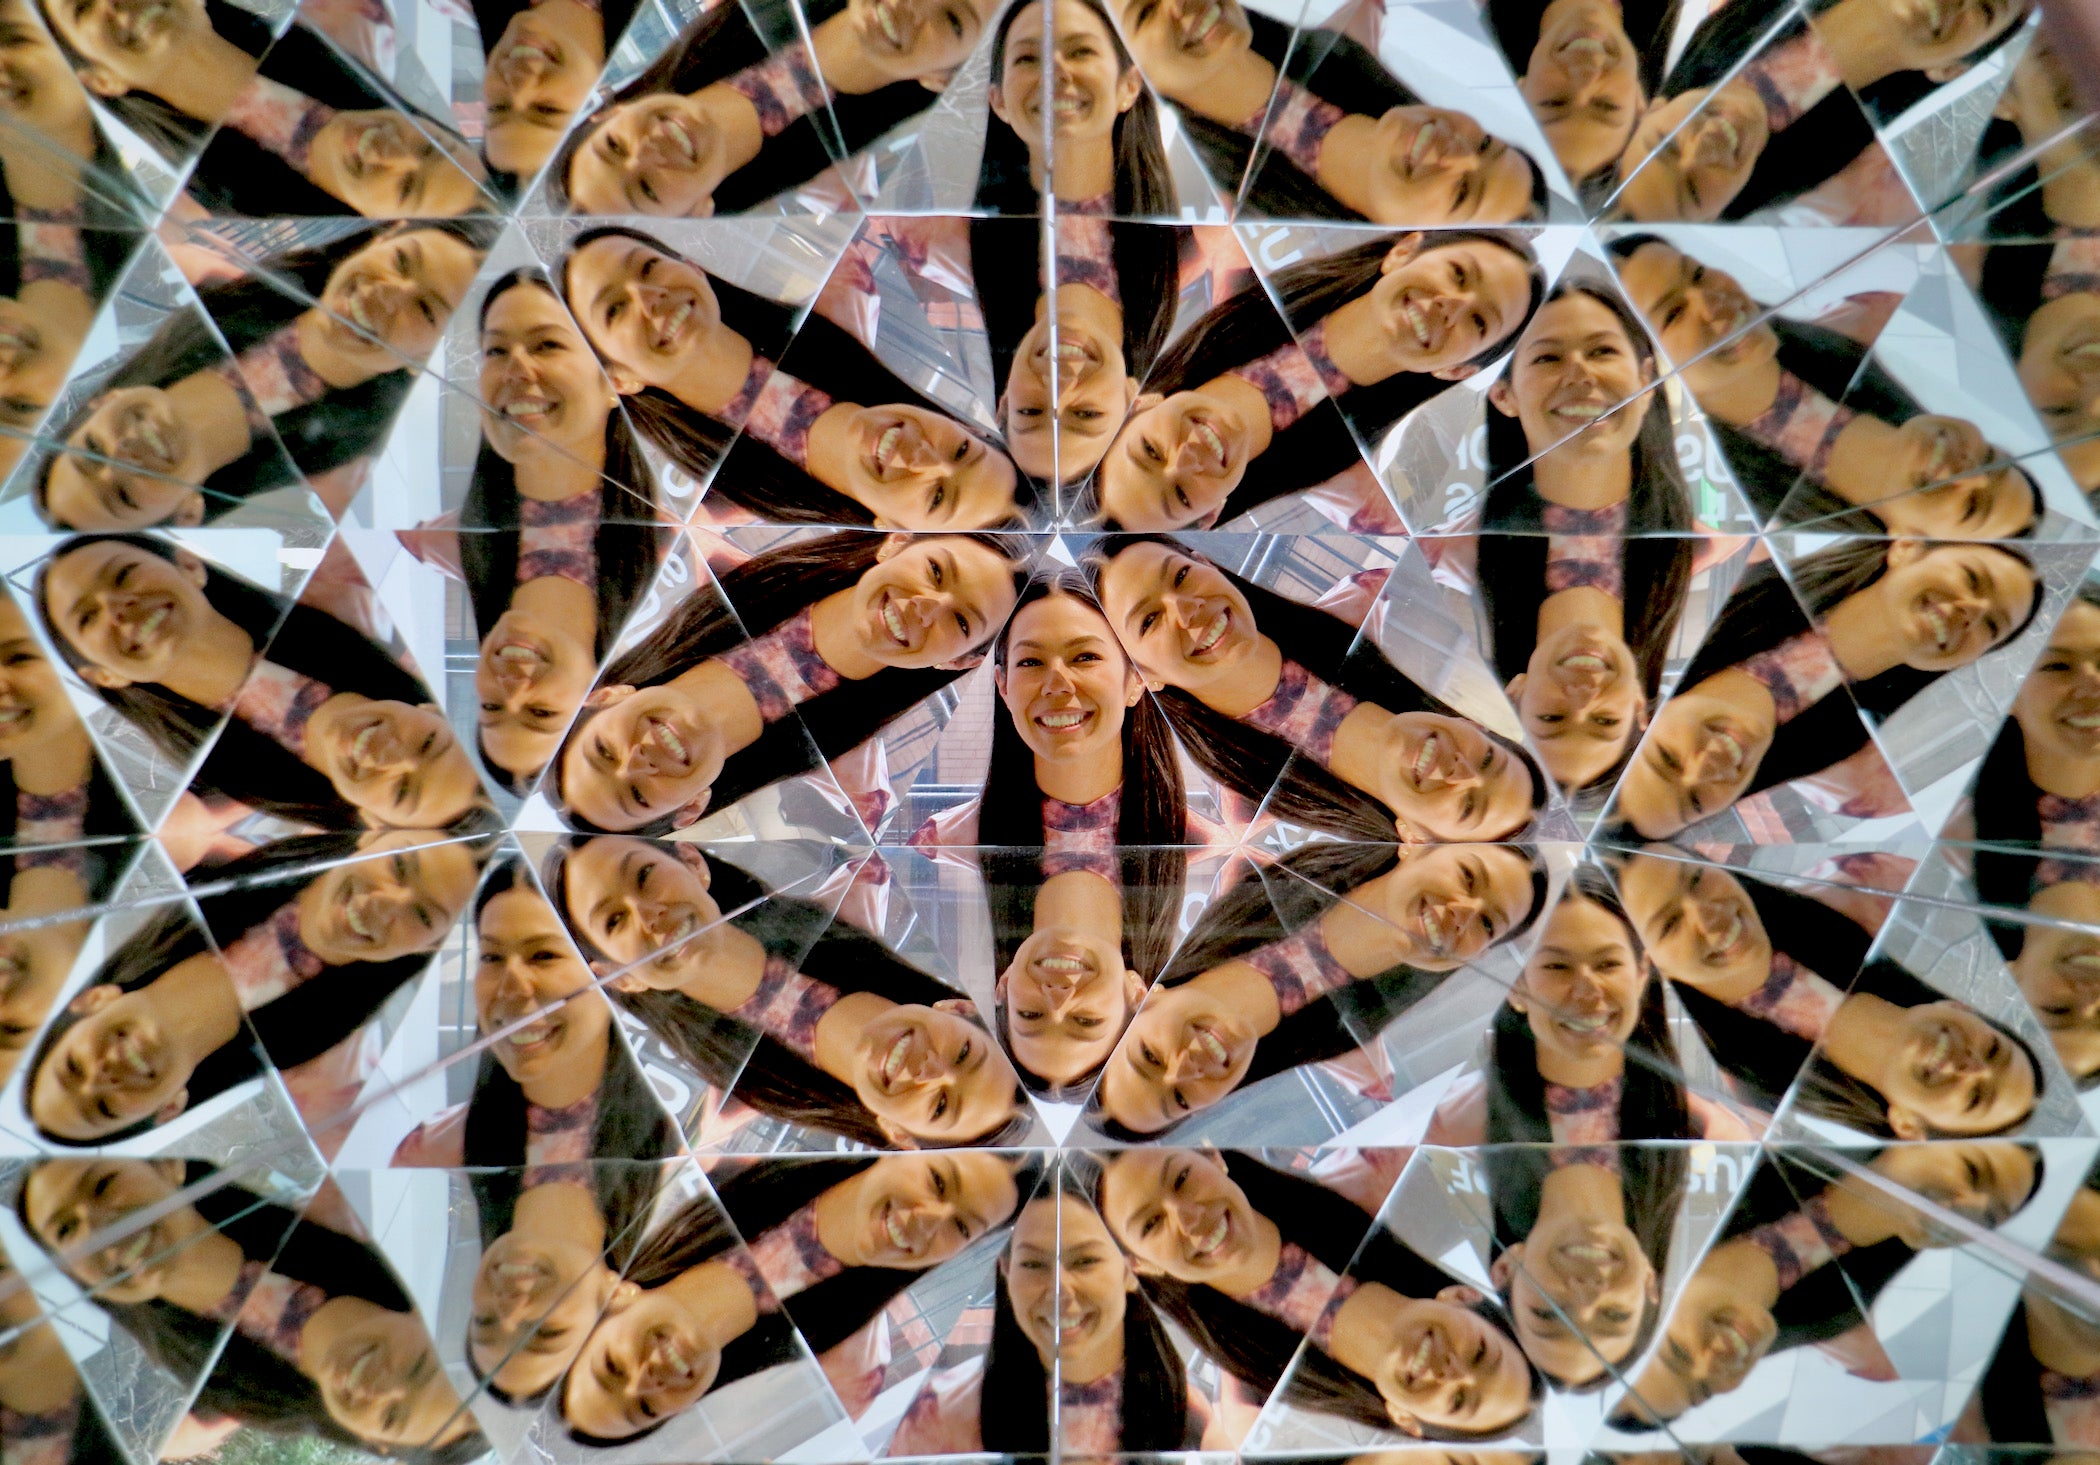 Stacy Rangel Stec is multiplied by a large kaleidoscope at the Museum of Illusions